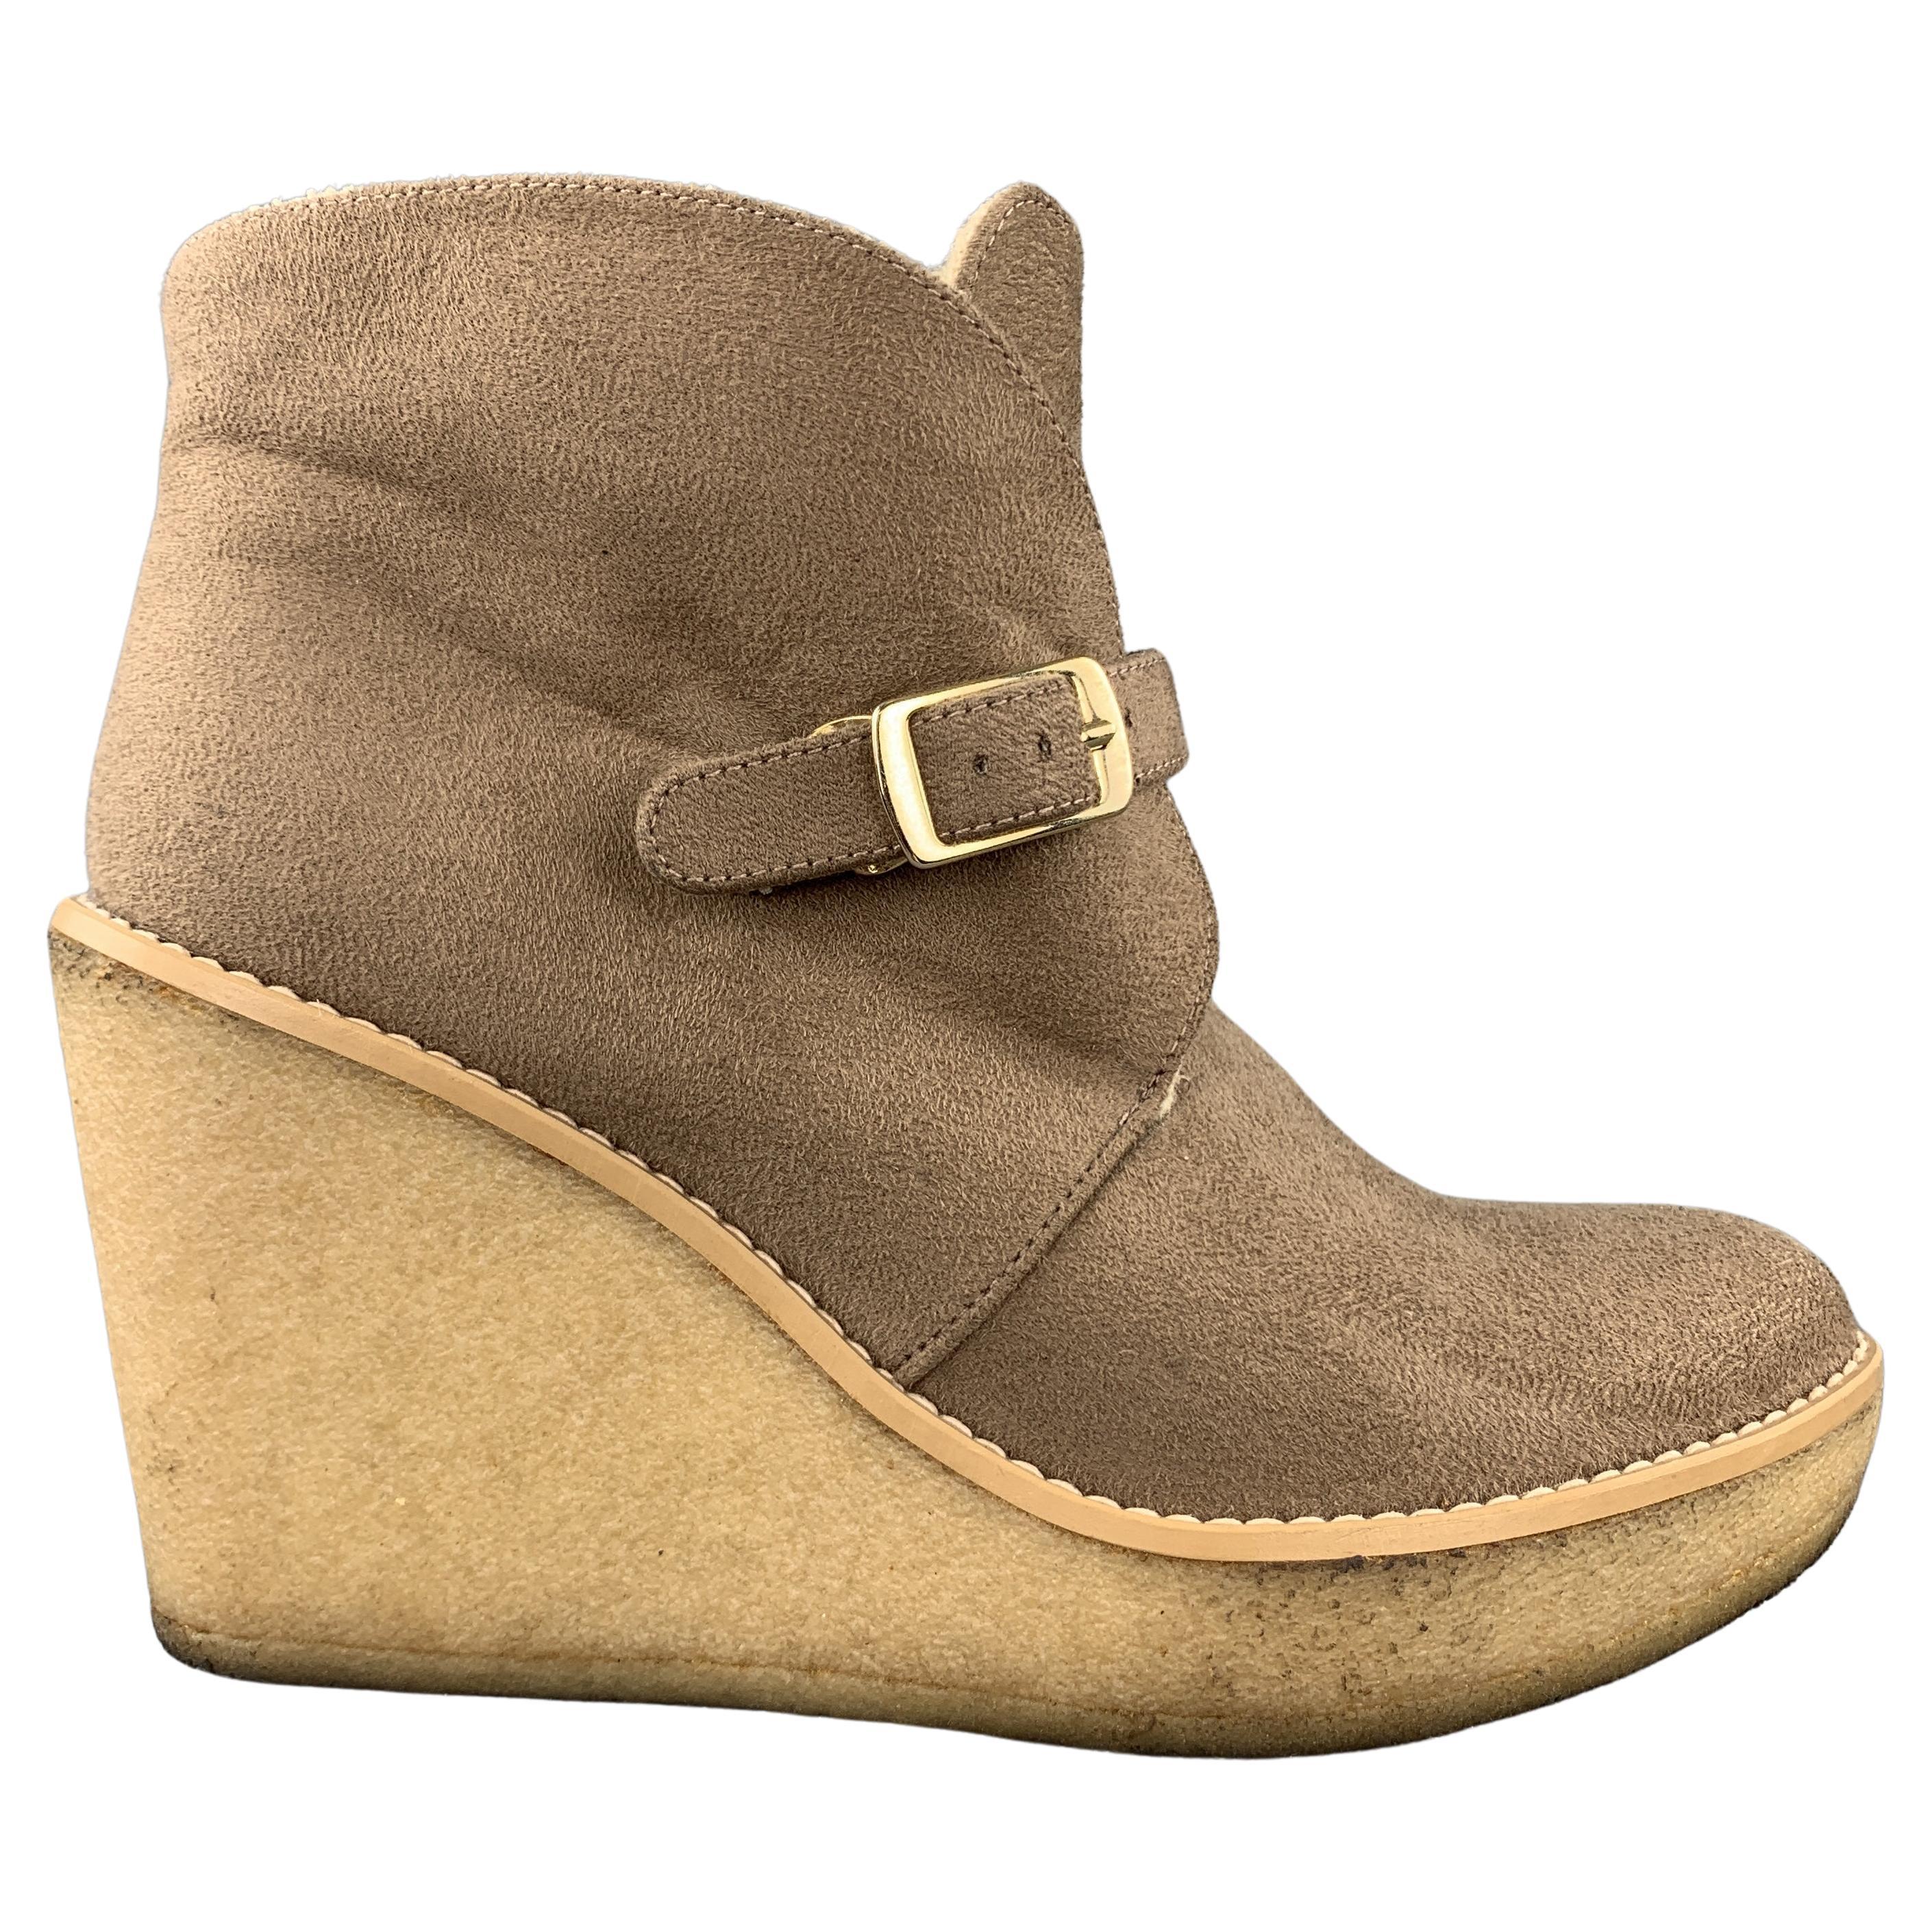 STELLA McCARTNEY Size 7 Taupe Faux Shearling Gum Wedge Boots For Sale